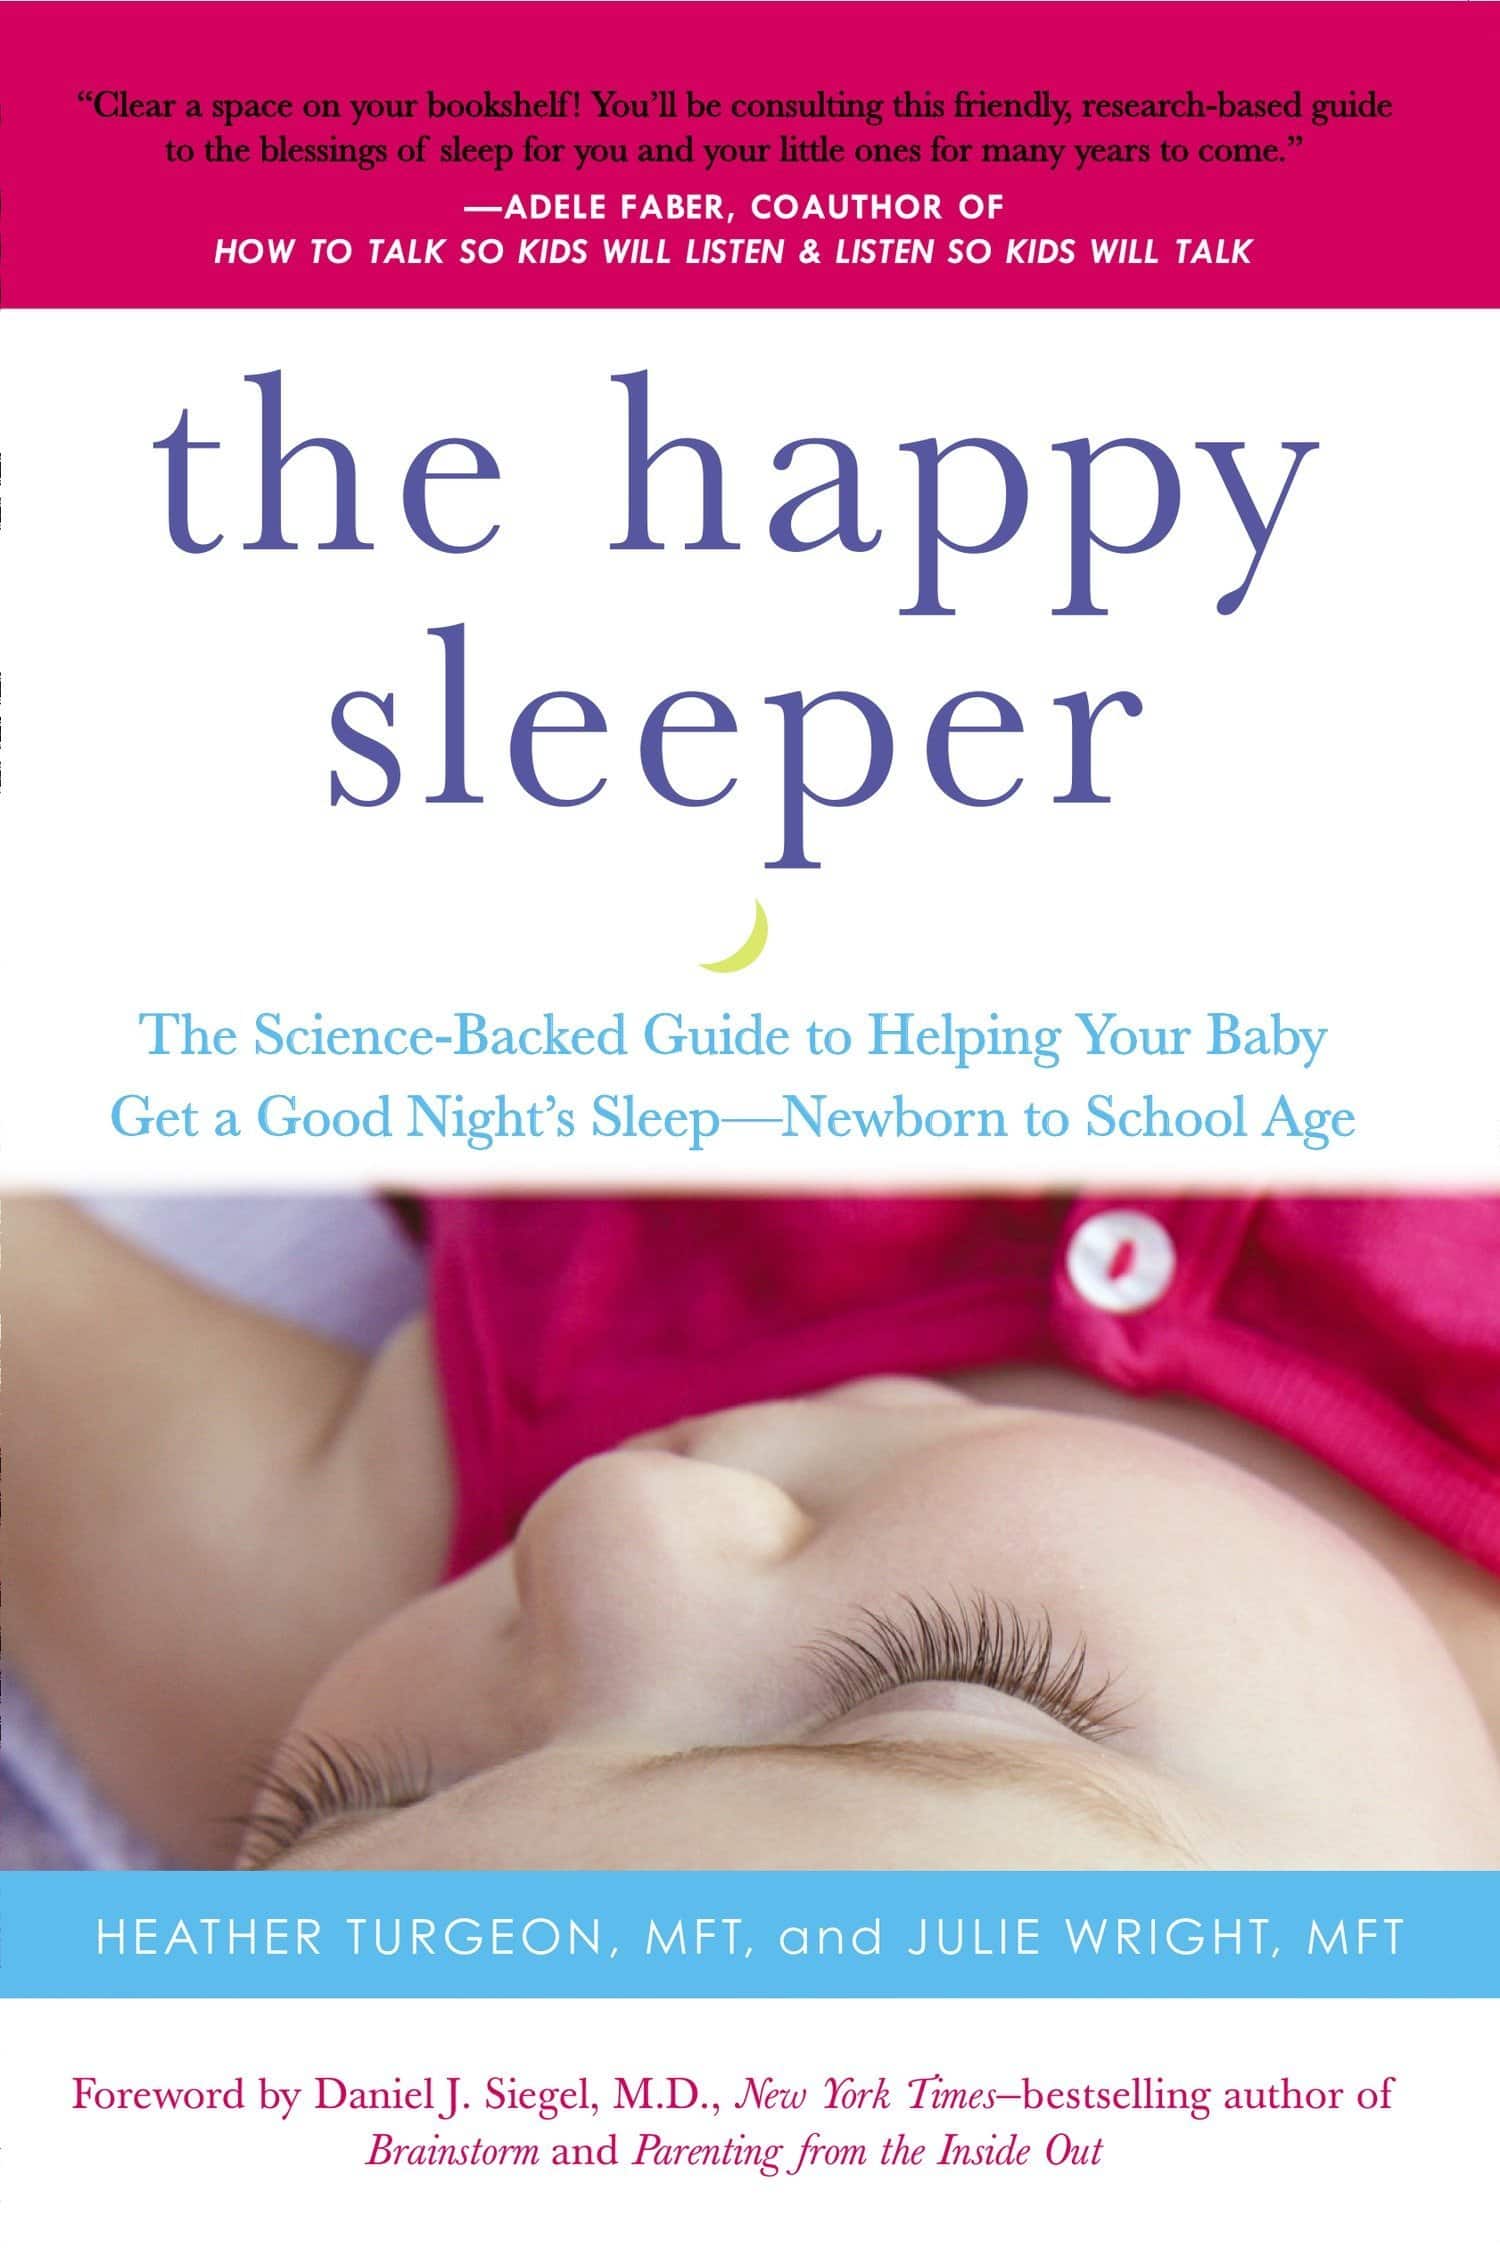 "The Happy Sleeper" by Heather Turgeon, M.F.T., and Julie Wright, M.F.T.